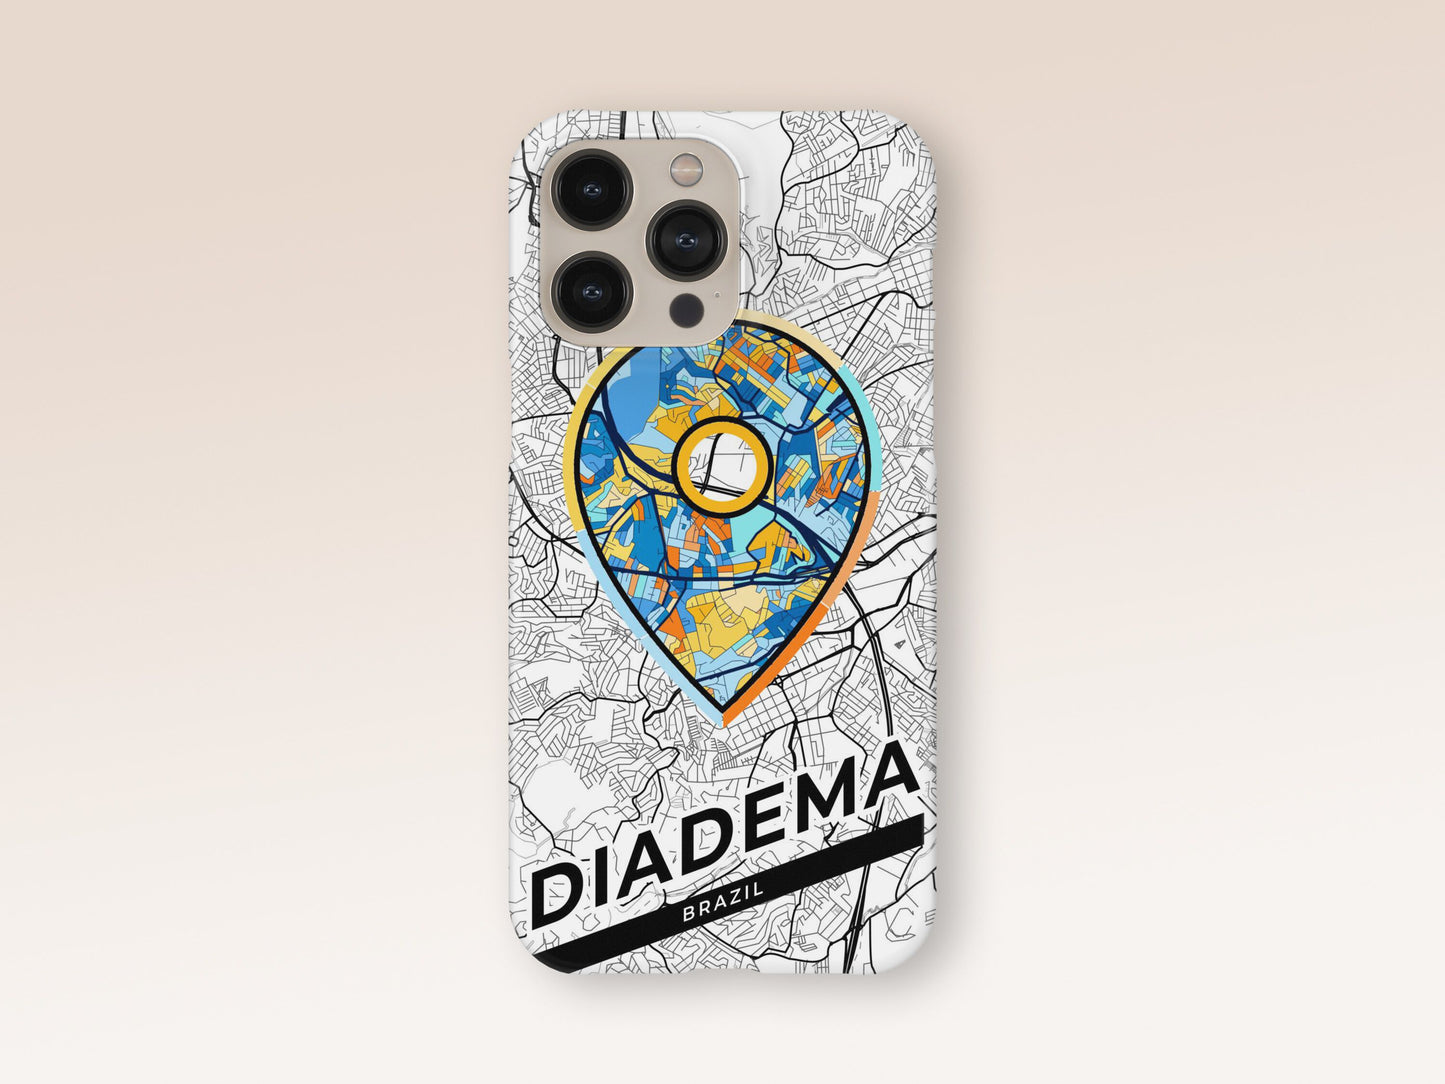 Diadema Brazil slim phone case with colorful icon. Birthday, wedding or housewarming gift. Couple match cases. 1